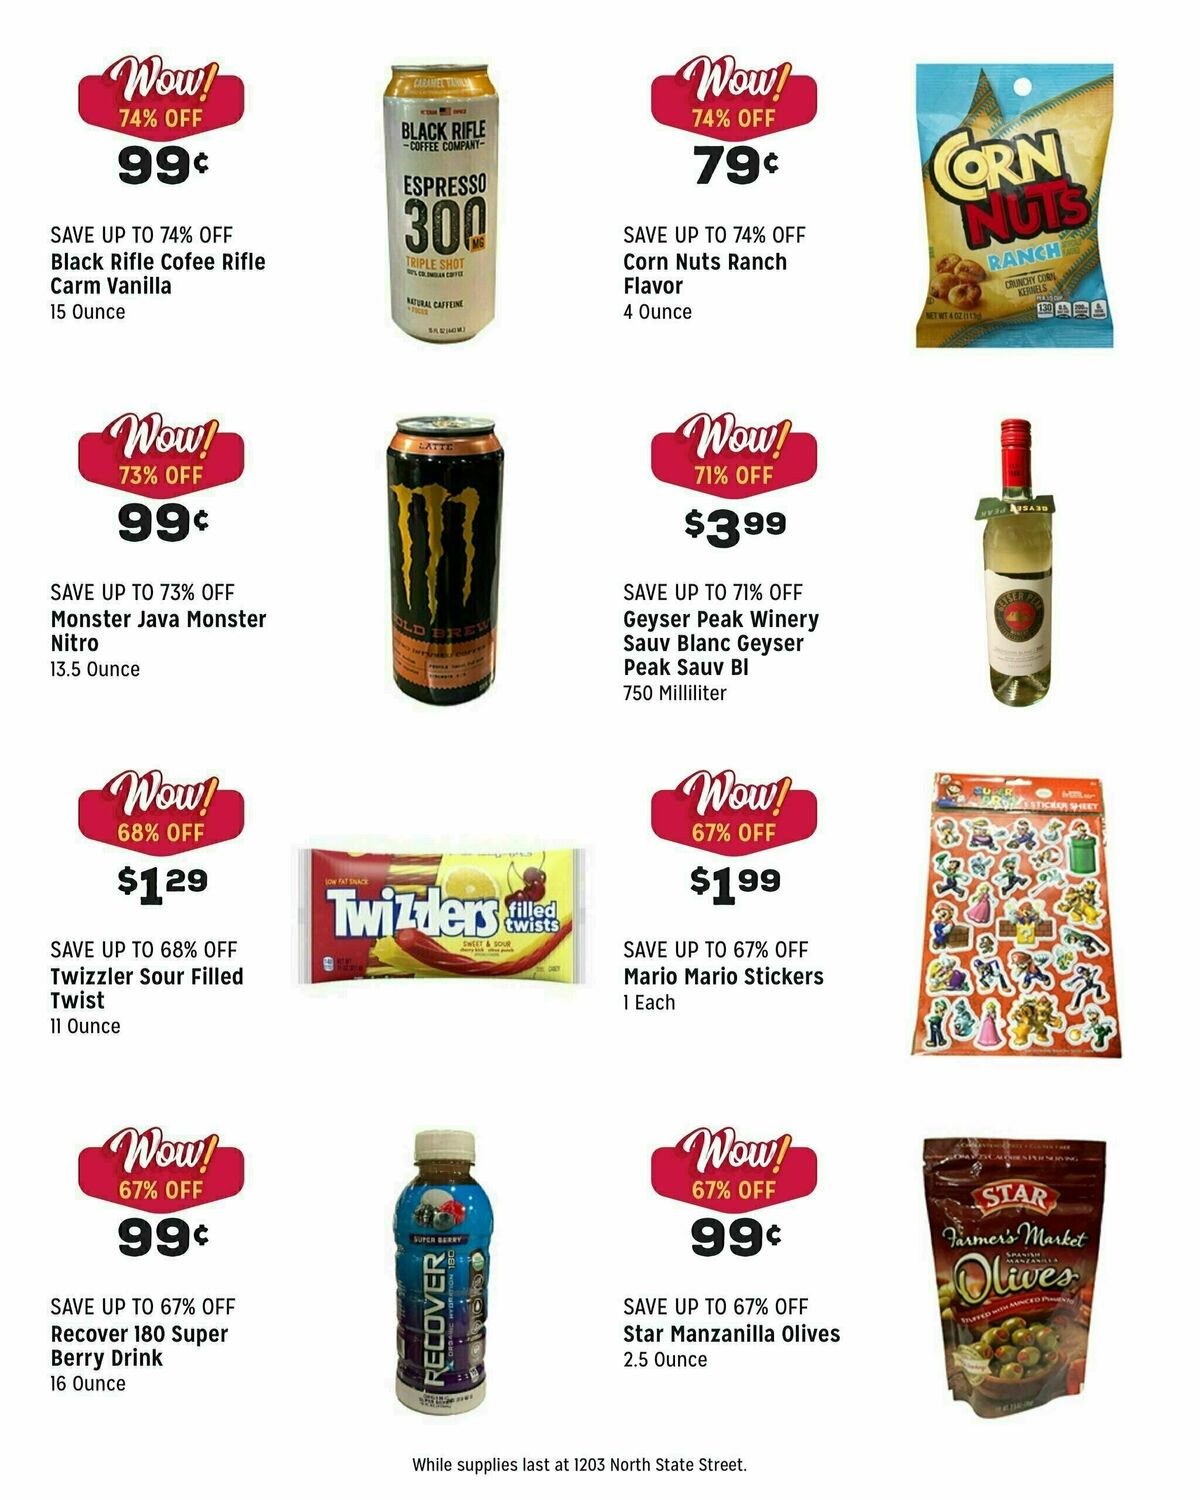 Grocery Outlet Weekly Ad from March 6